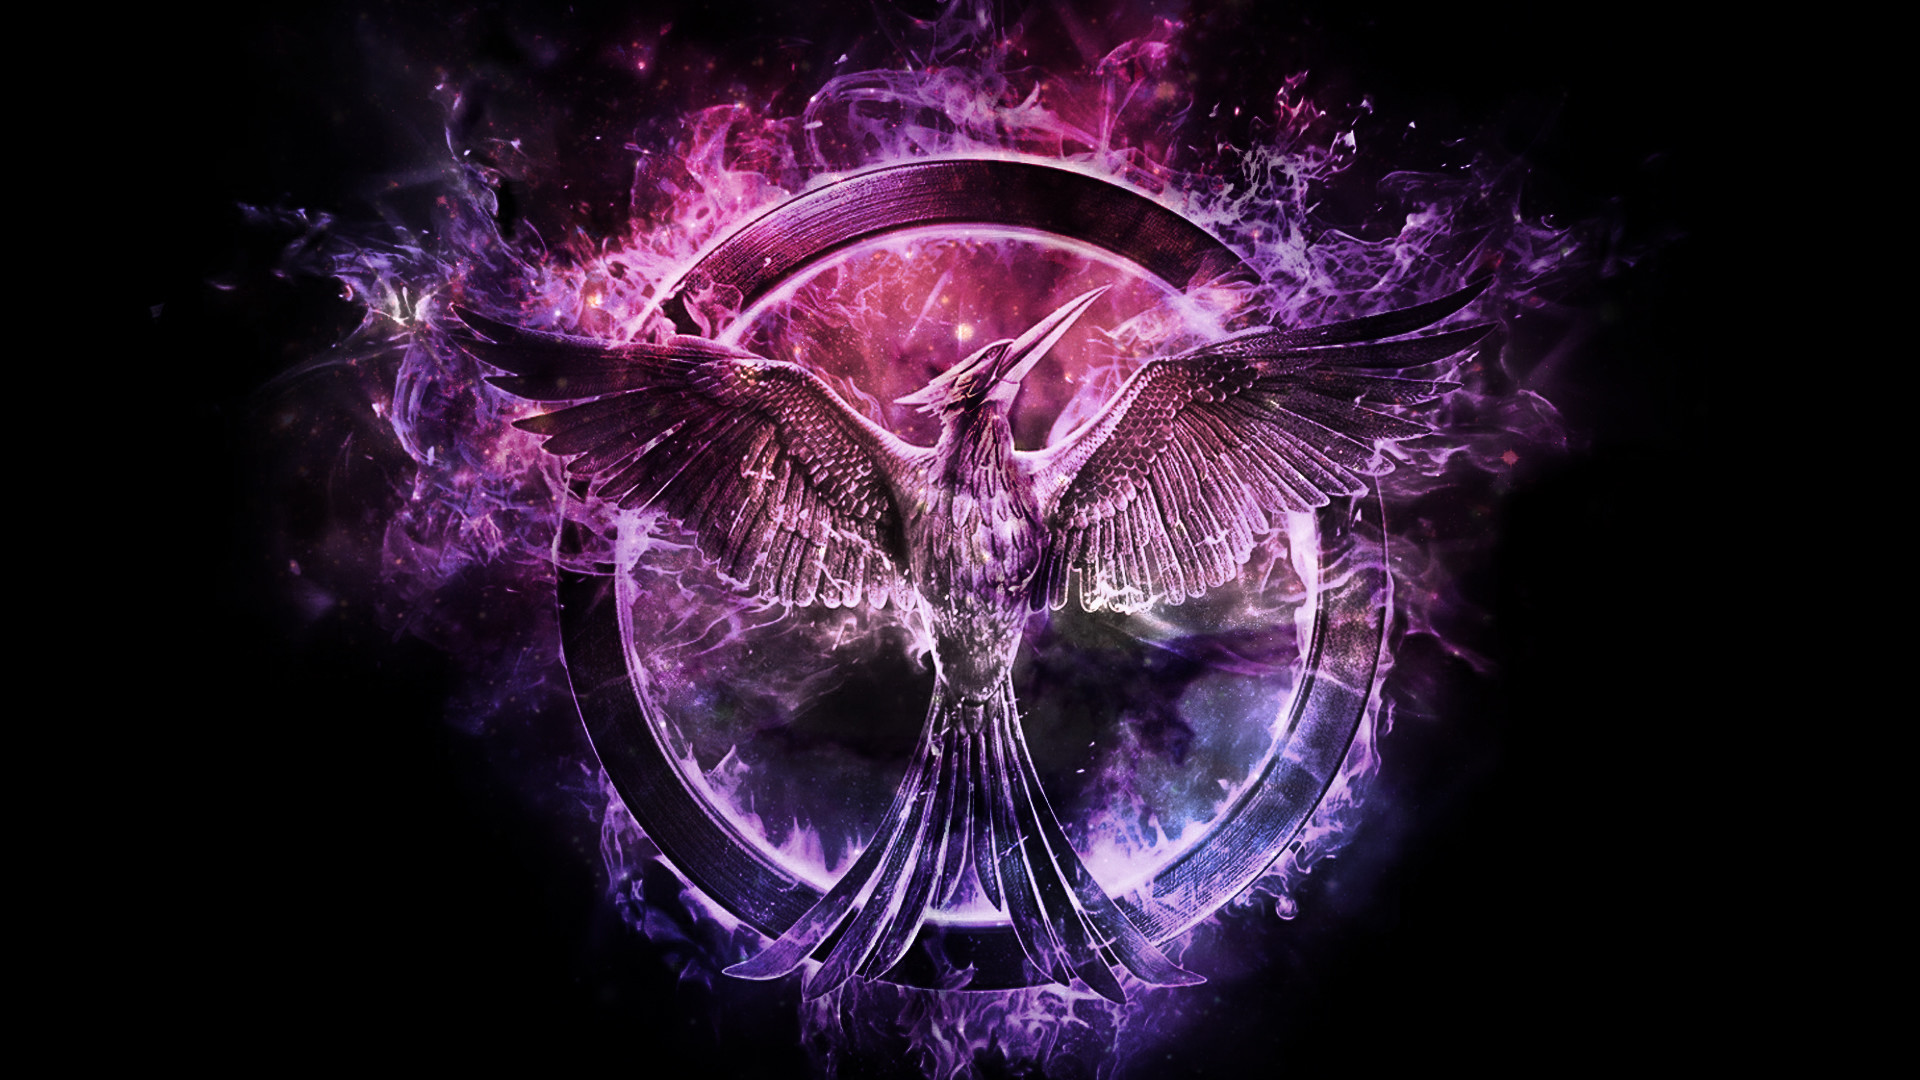 1 The Hunger Games - Cool Hunger Games Backgrounds , HD Wallpaper & Backgrounds